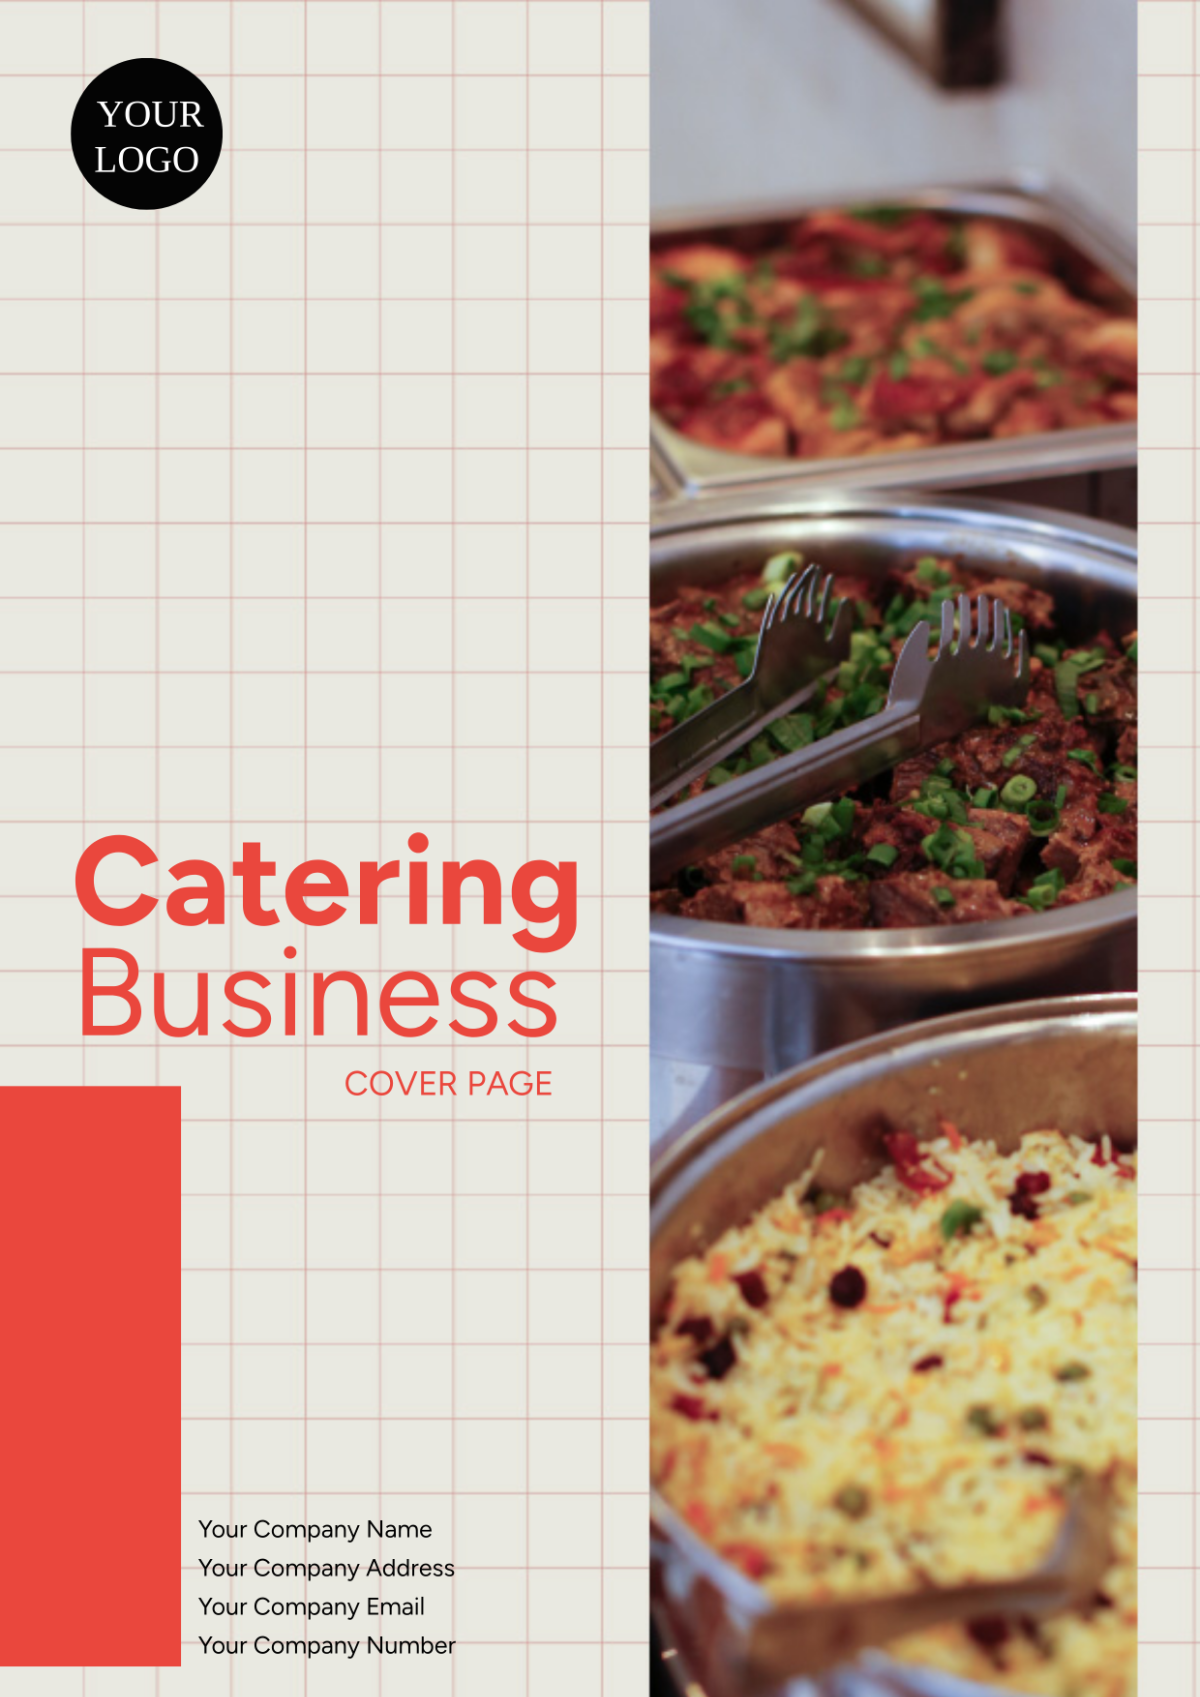 Catering Business Cover Page